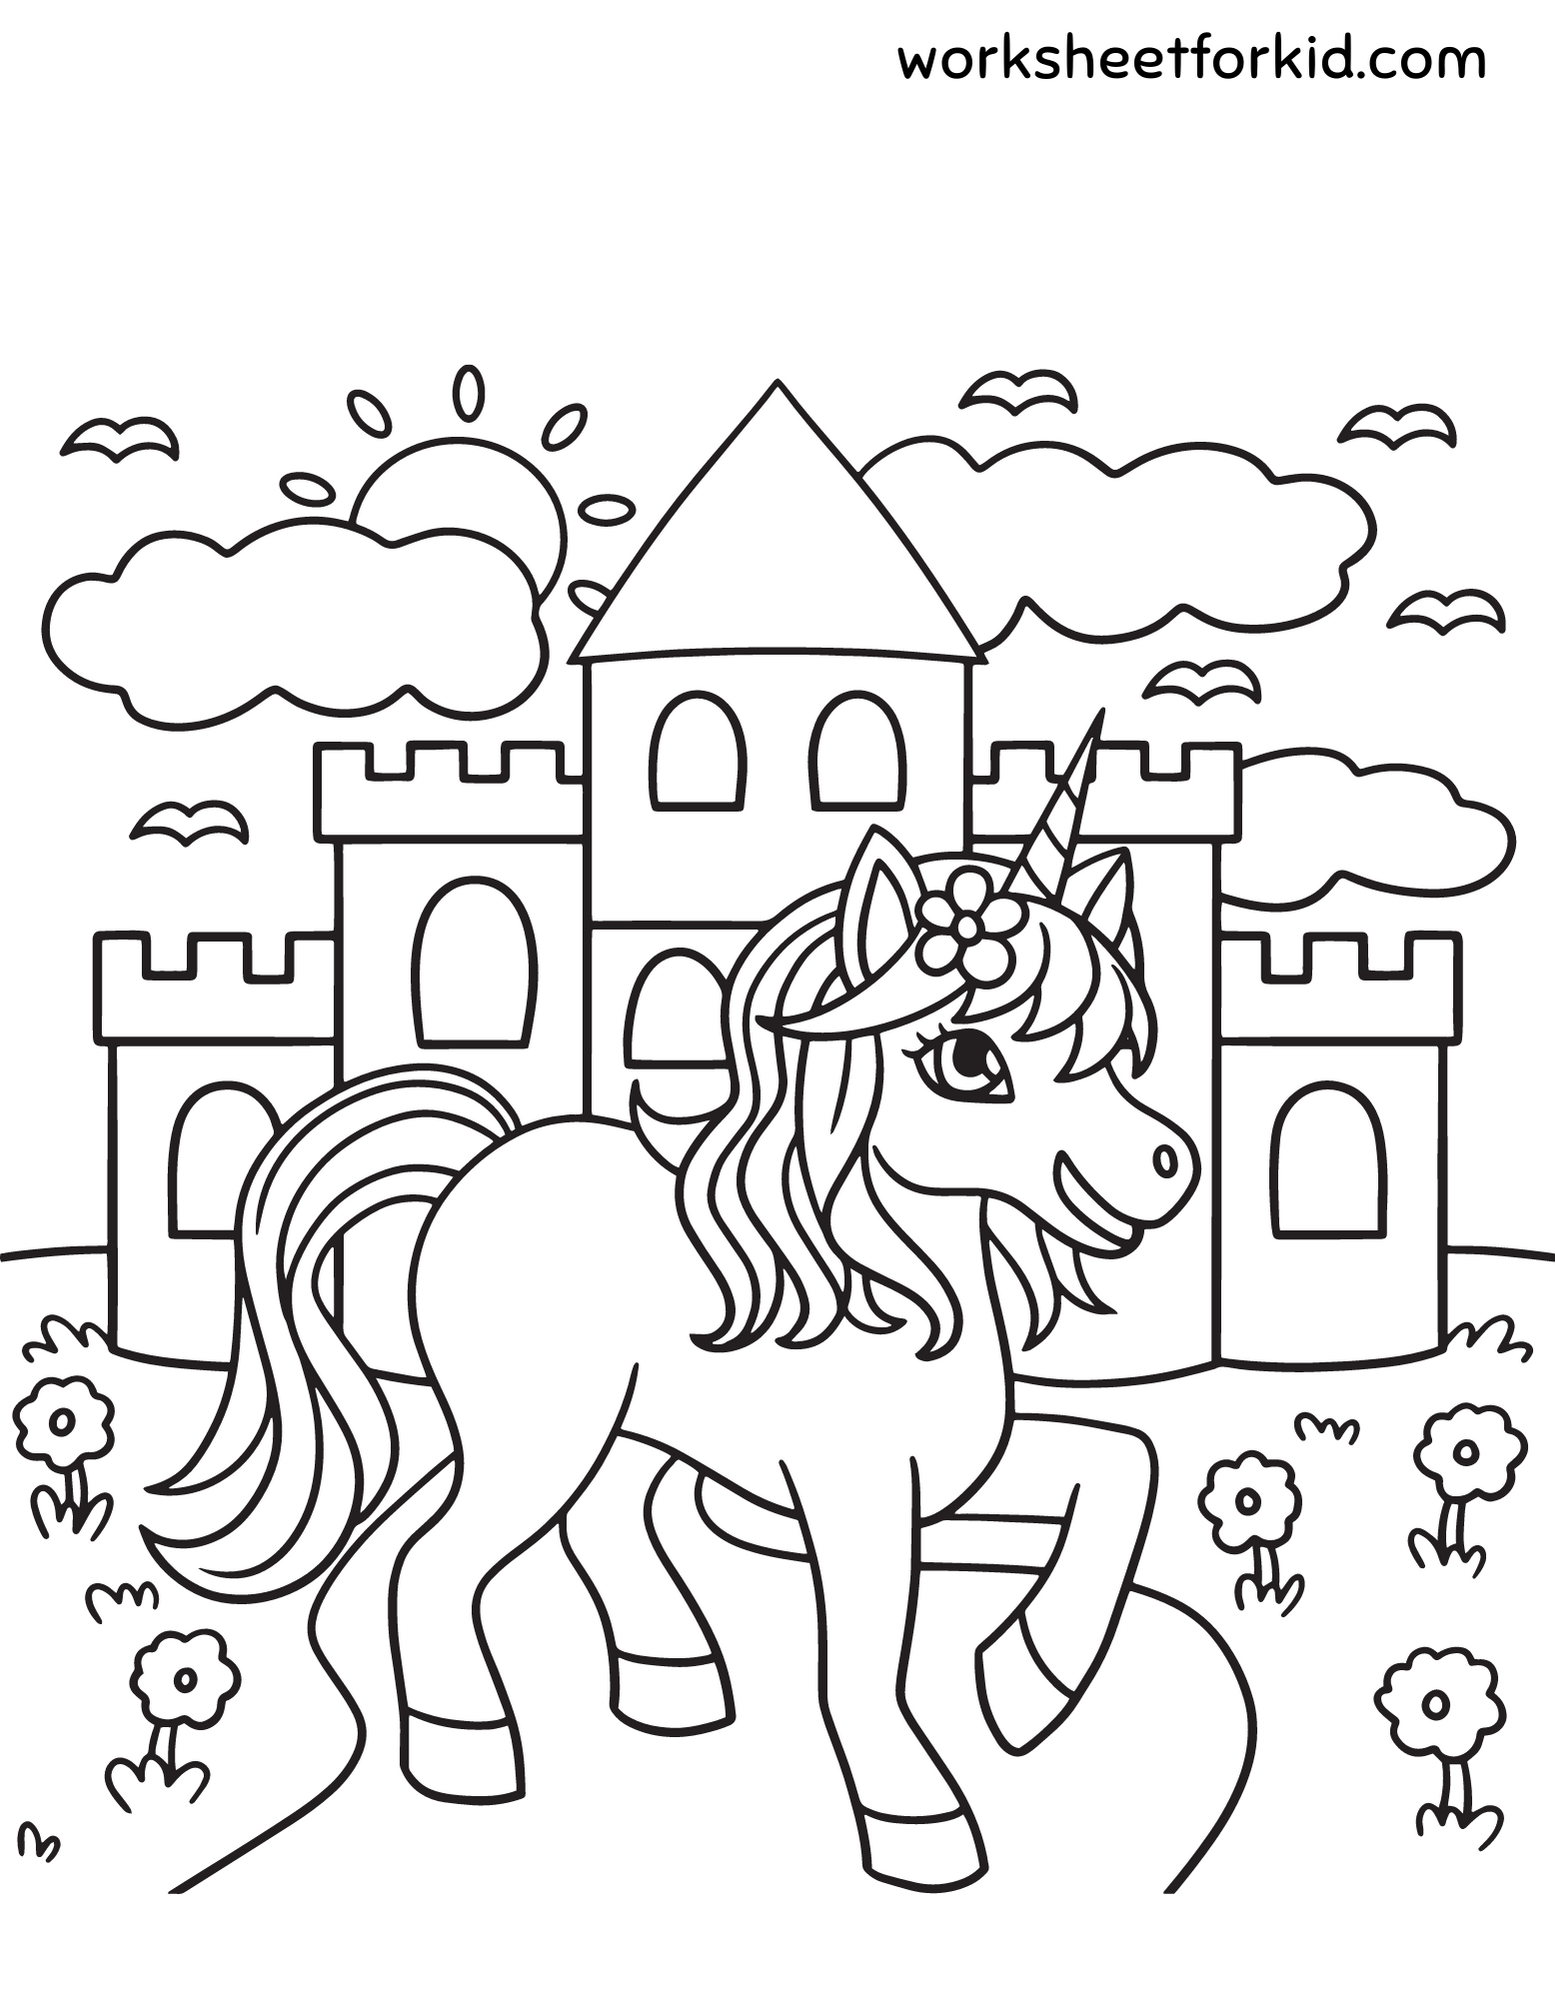 Free Animals Coloring Pages-20